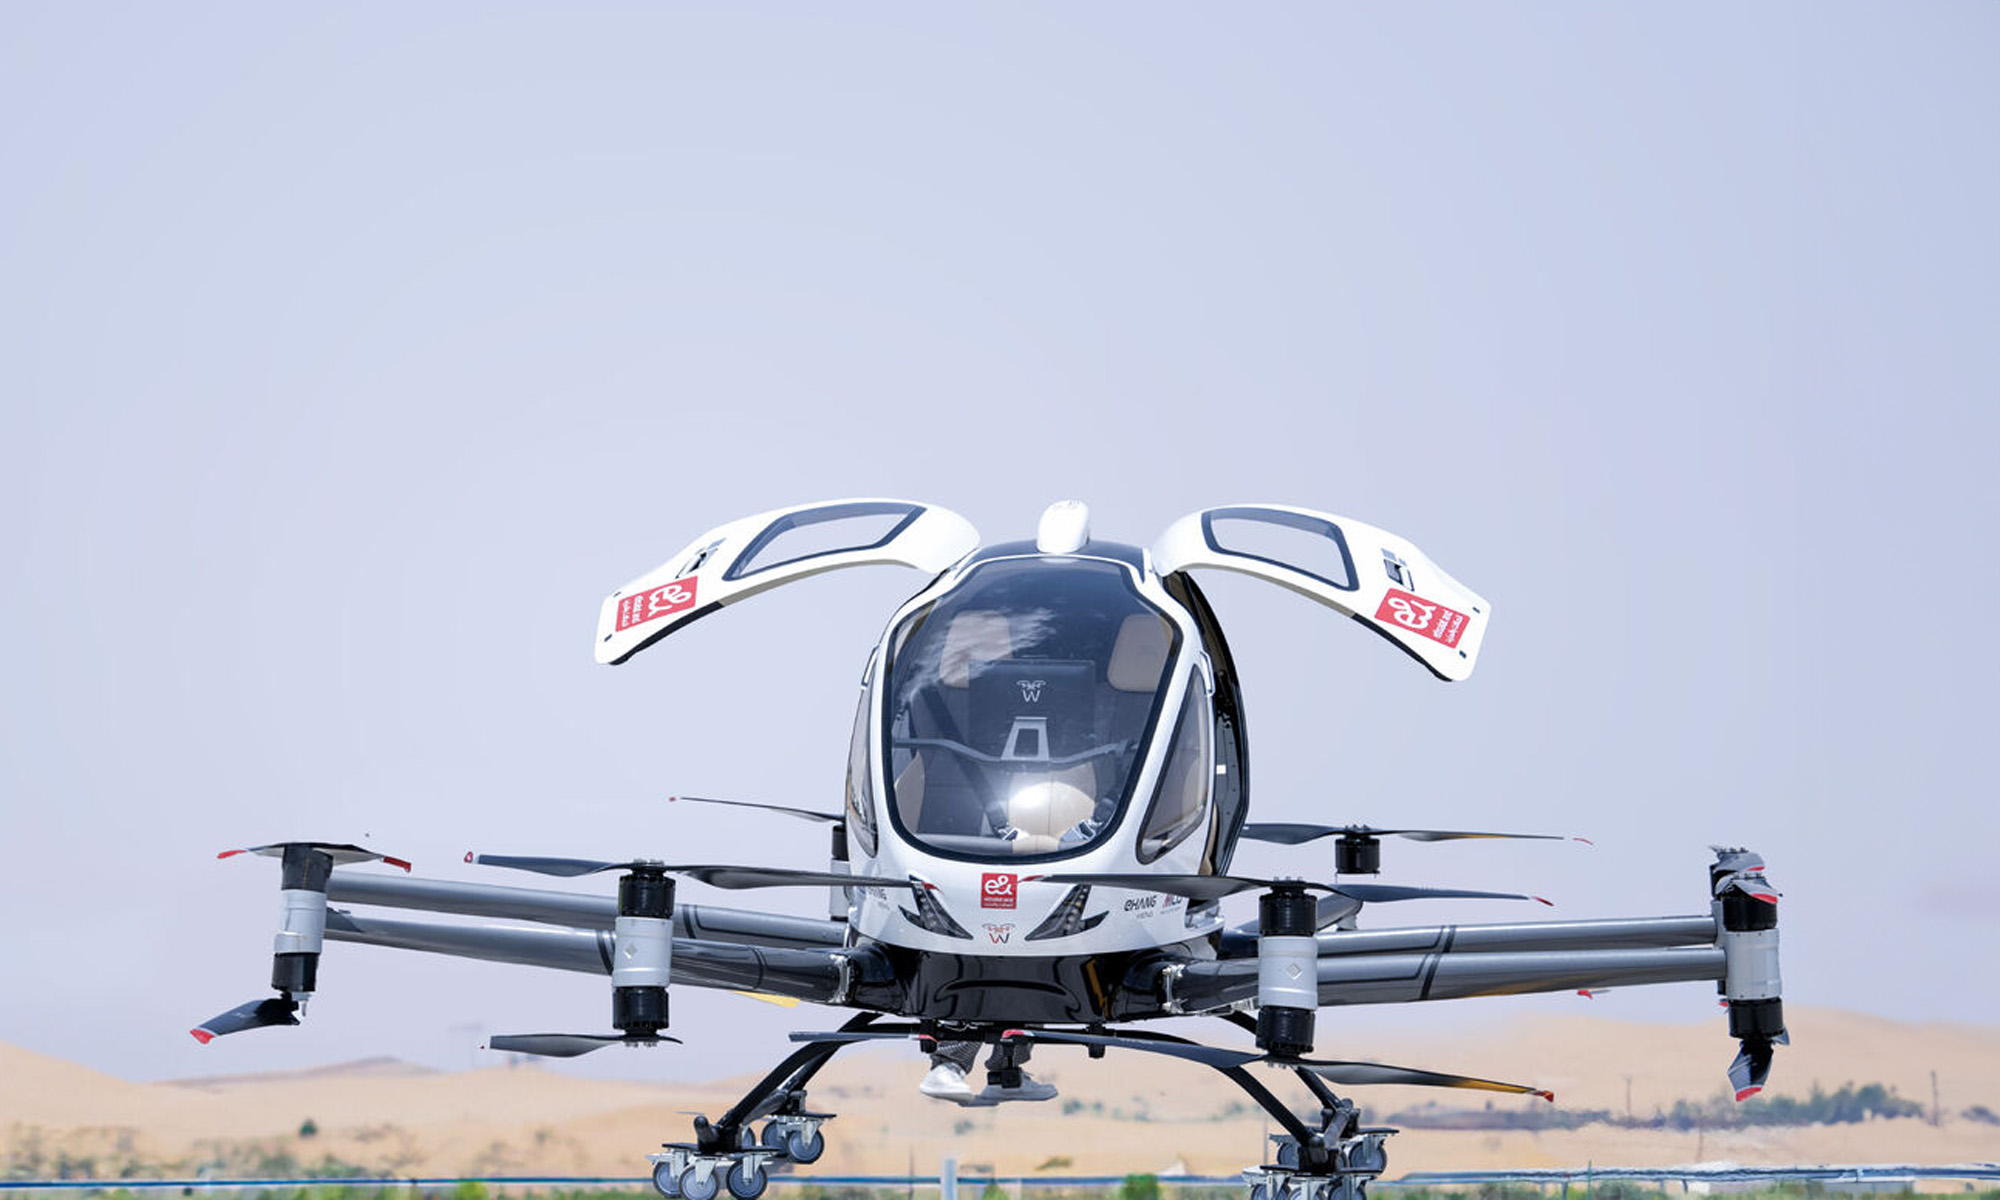 abu dhabi hosts middle east's first passenger drone trials